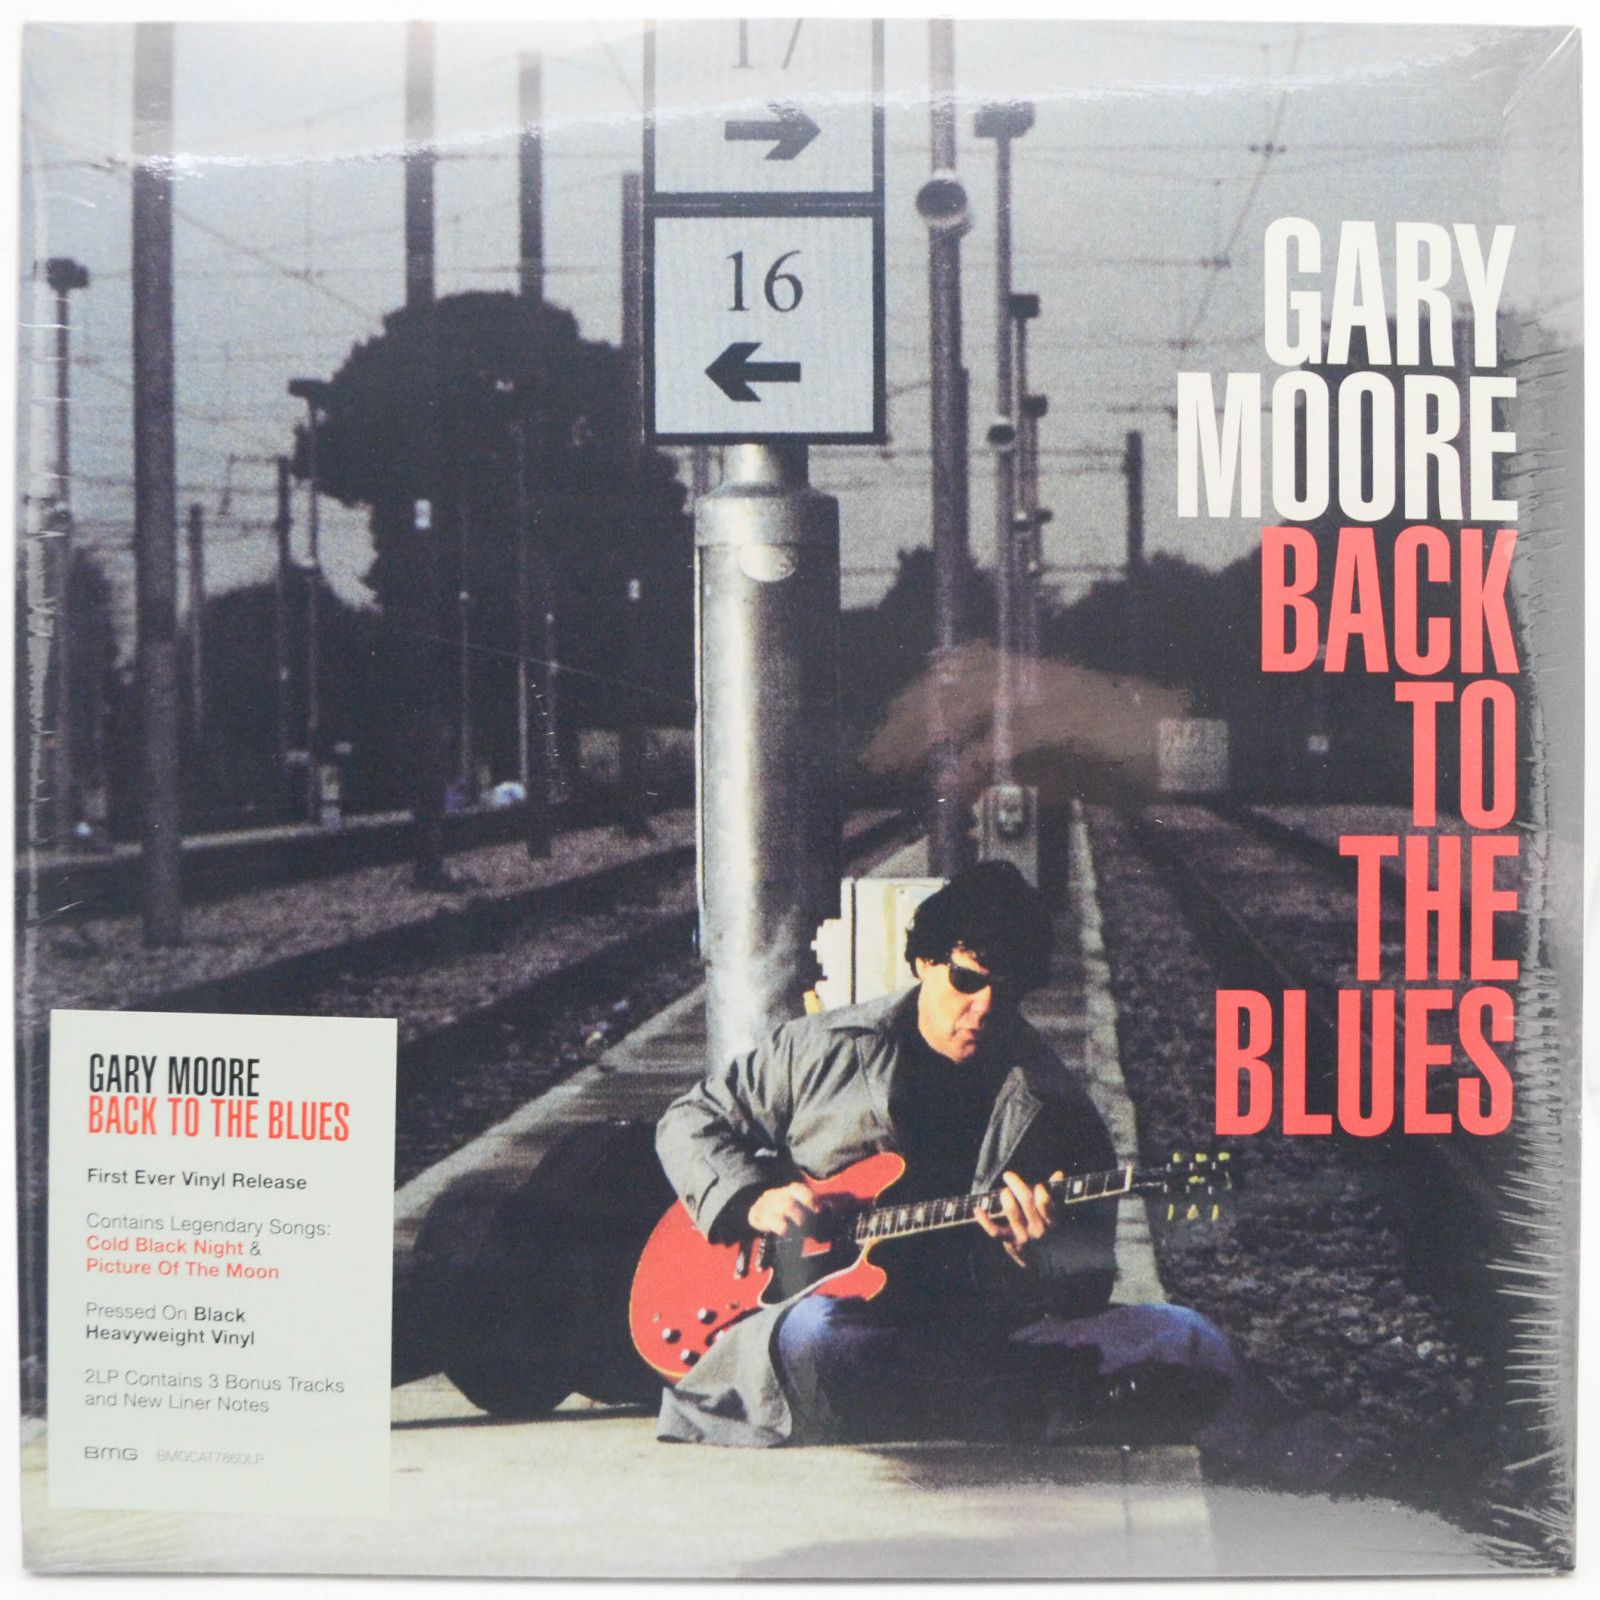 Gary Moore — Back To The Blues (2LP), 2001